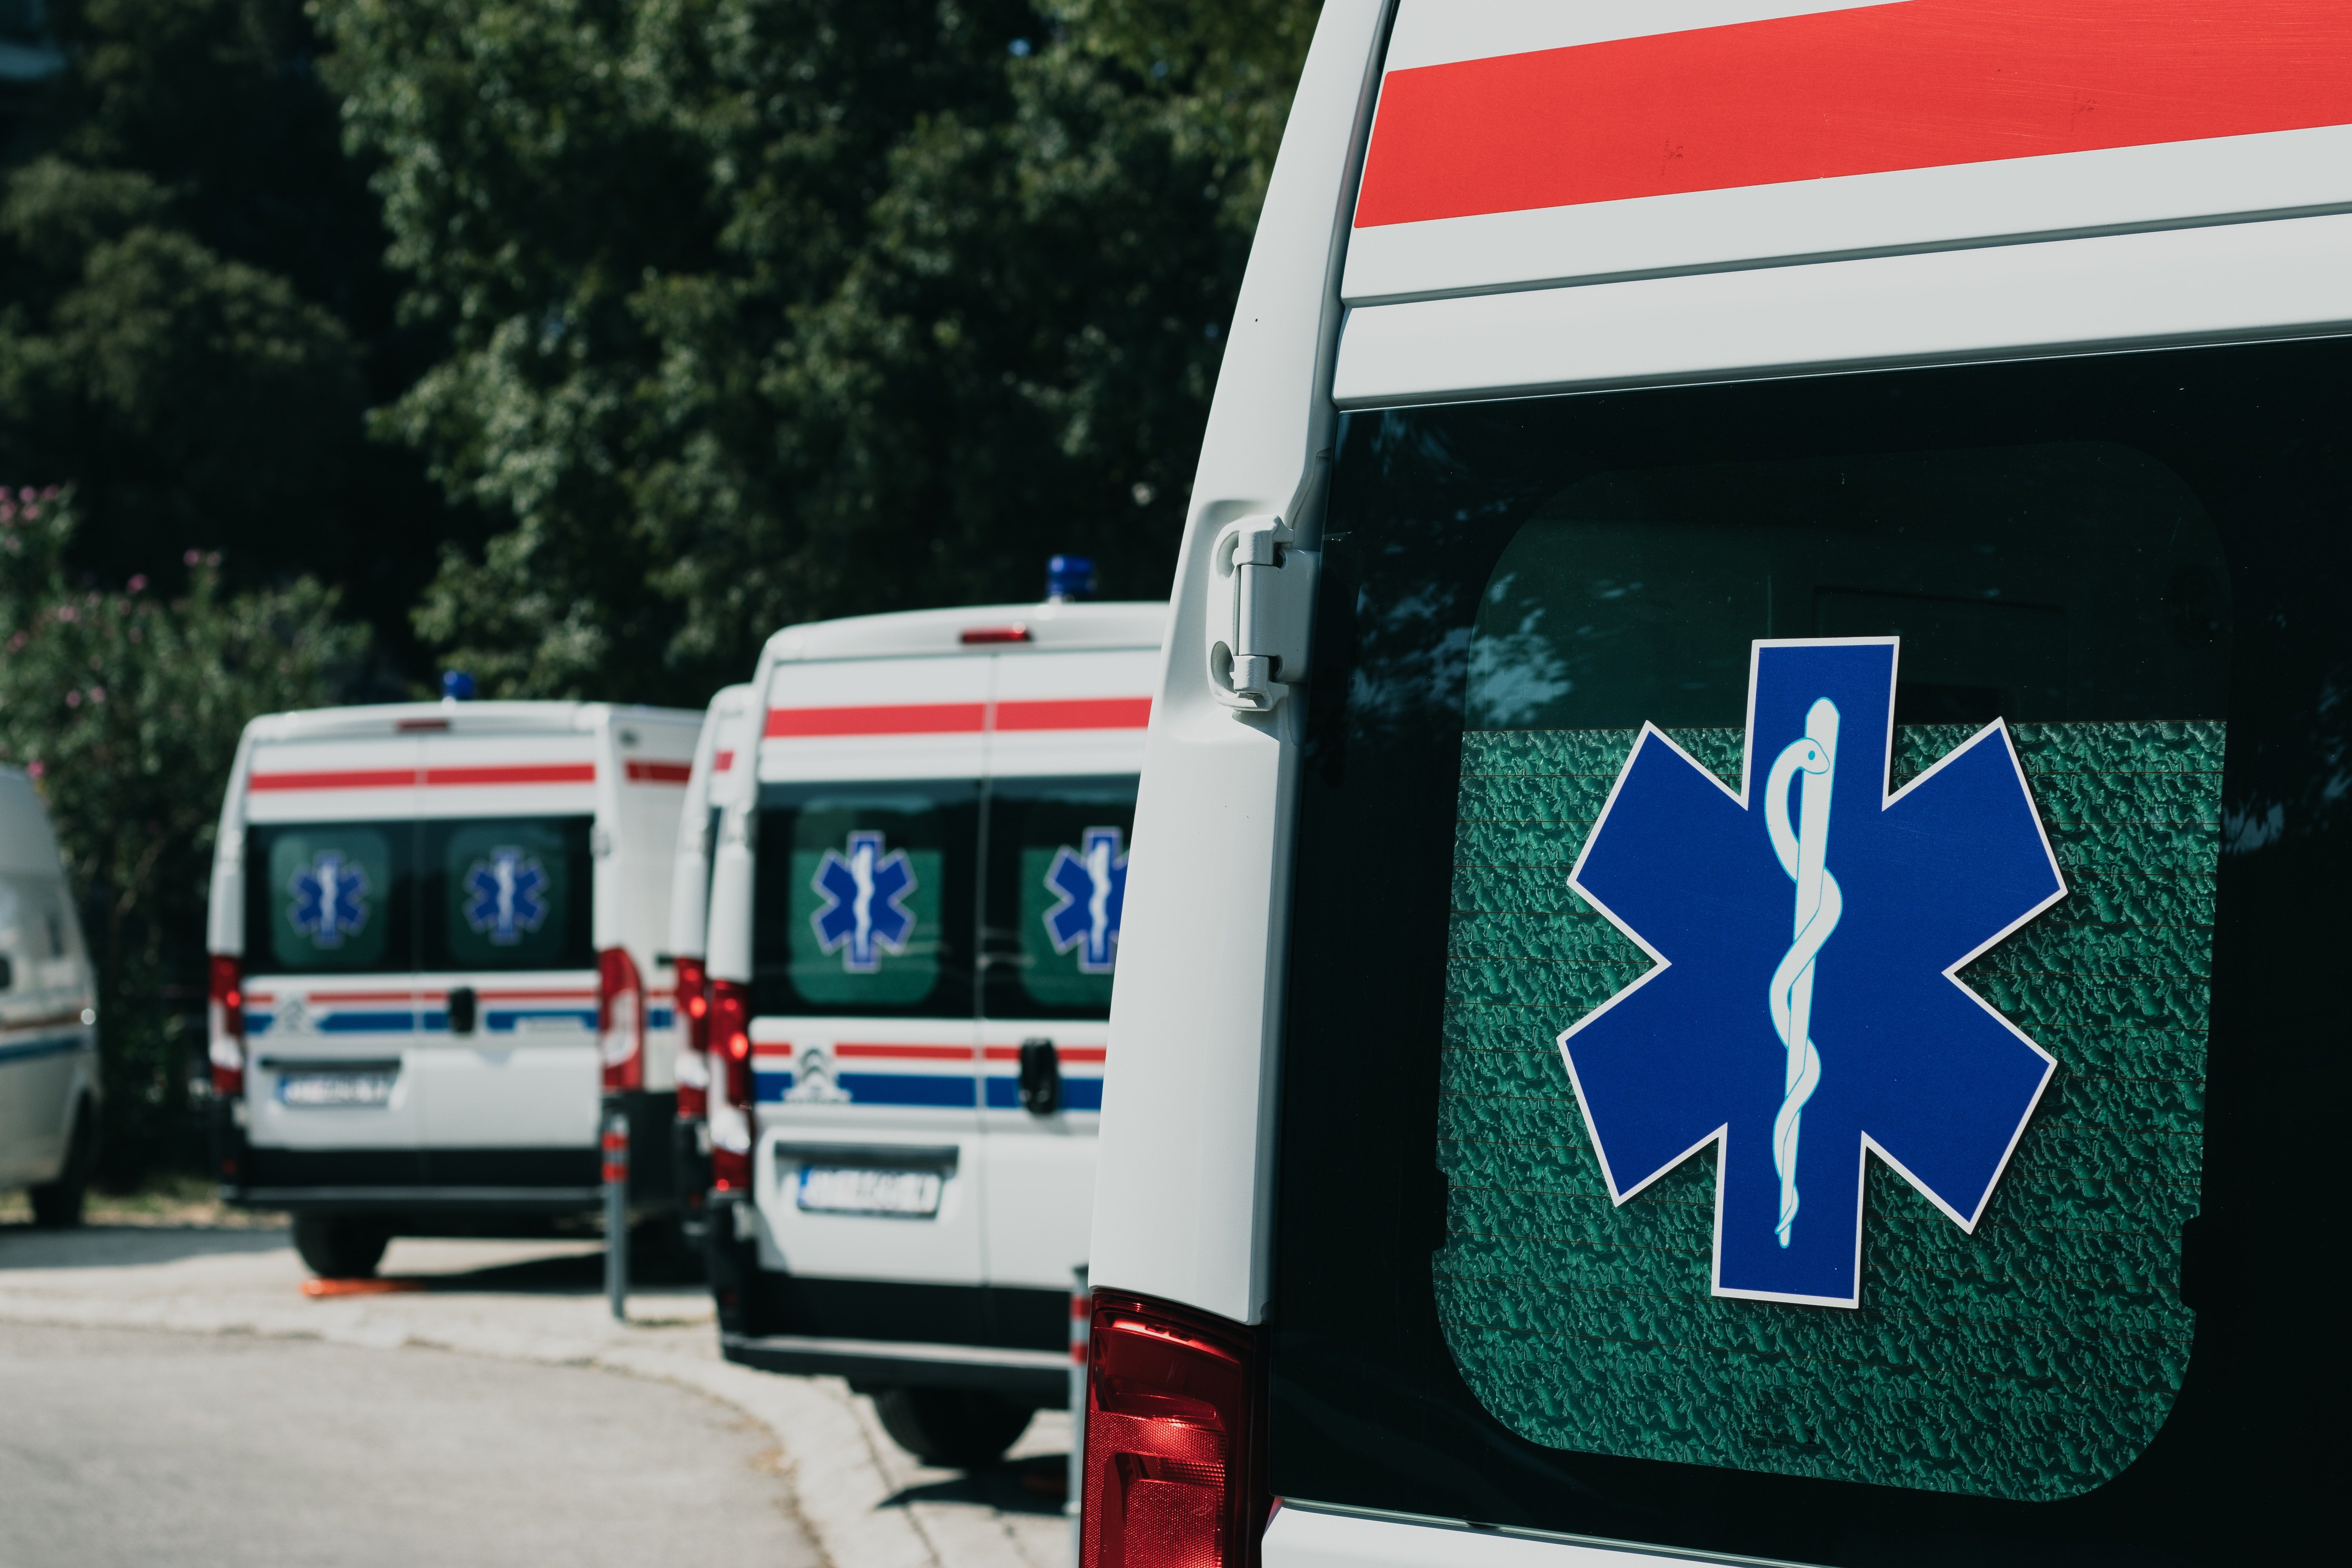 An ambulance arrived at the hospital just as Mark and Shelly were walking to the cafeteria. | Photo: Pexels